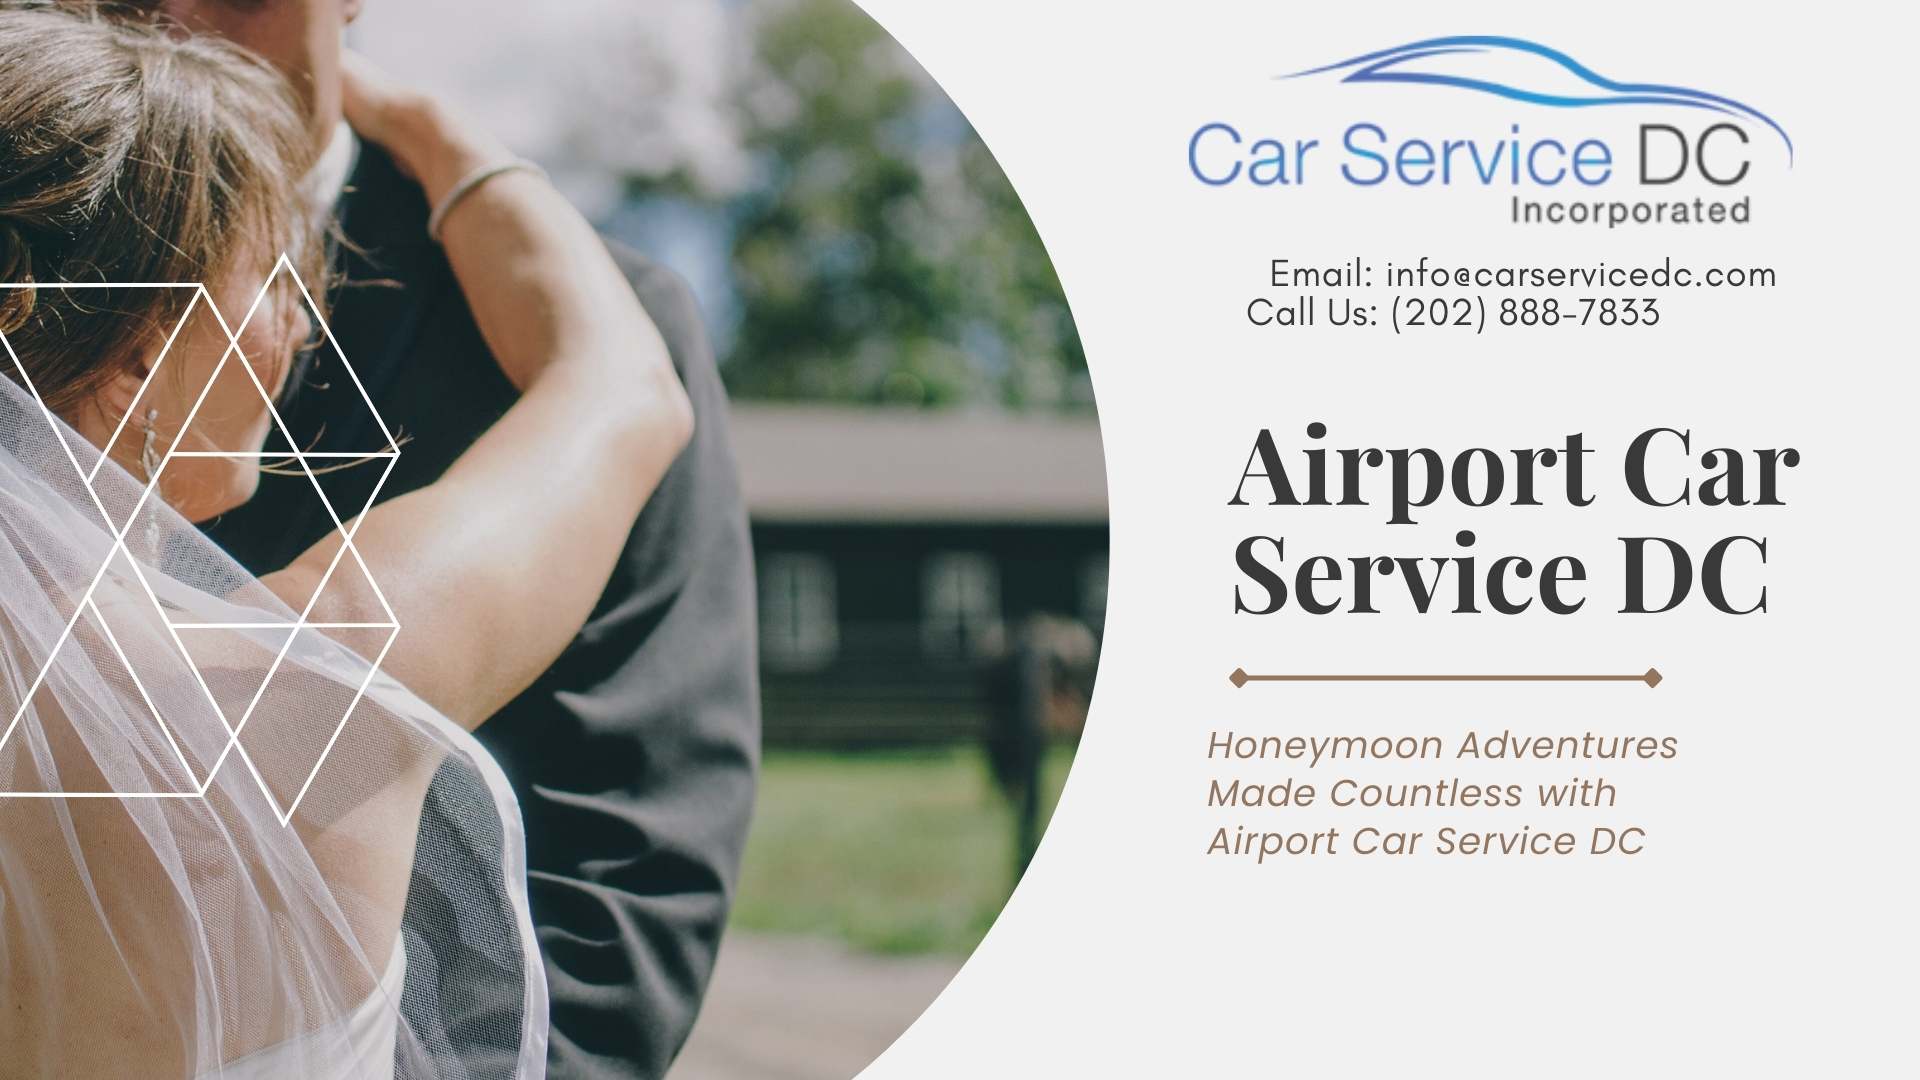 Honeymoon Adventures with Airport Car Service DC